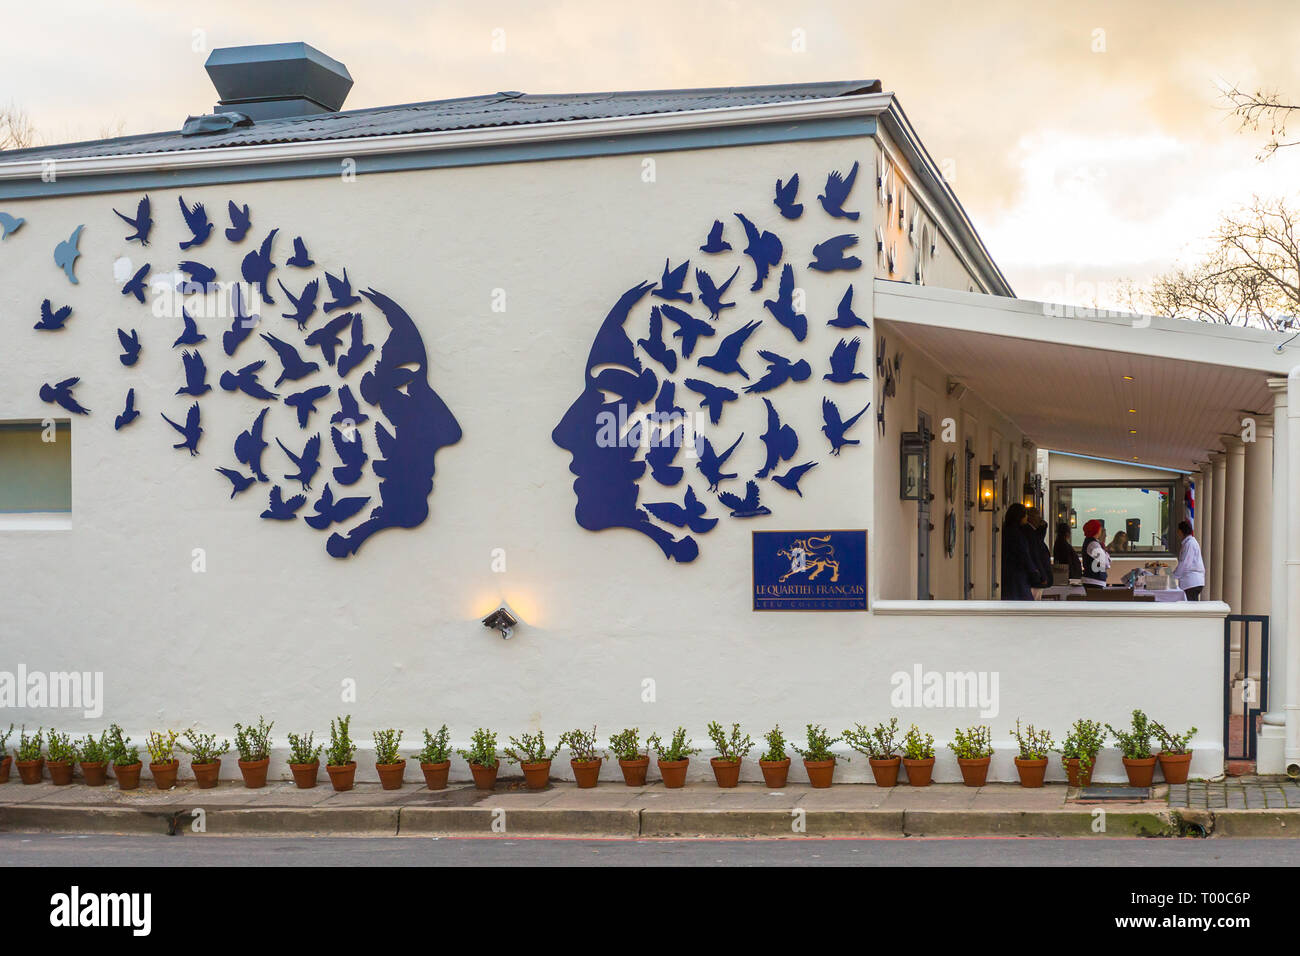 Cape Winelands le quartier français boutique hotel and restaurant in Franschhoek, street art on the side of the building with two blue faces and birds Stock Photo